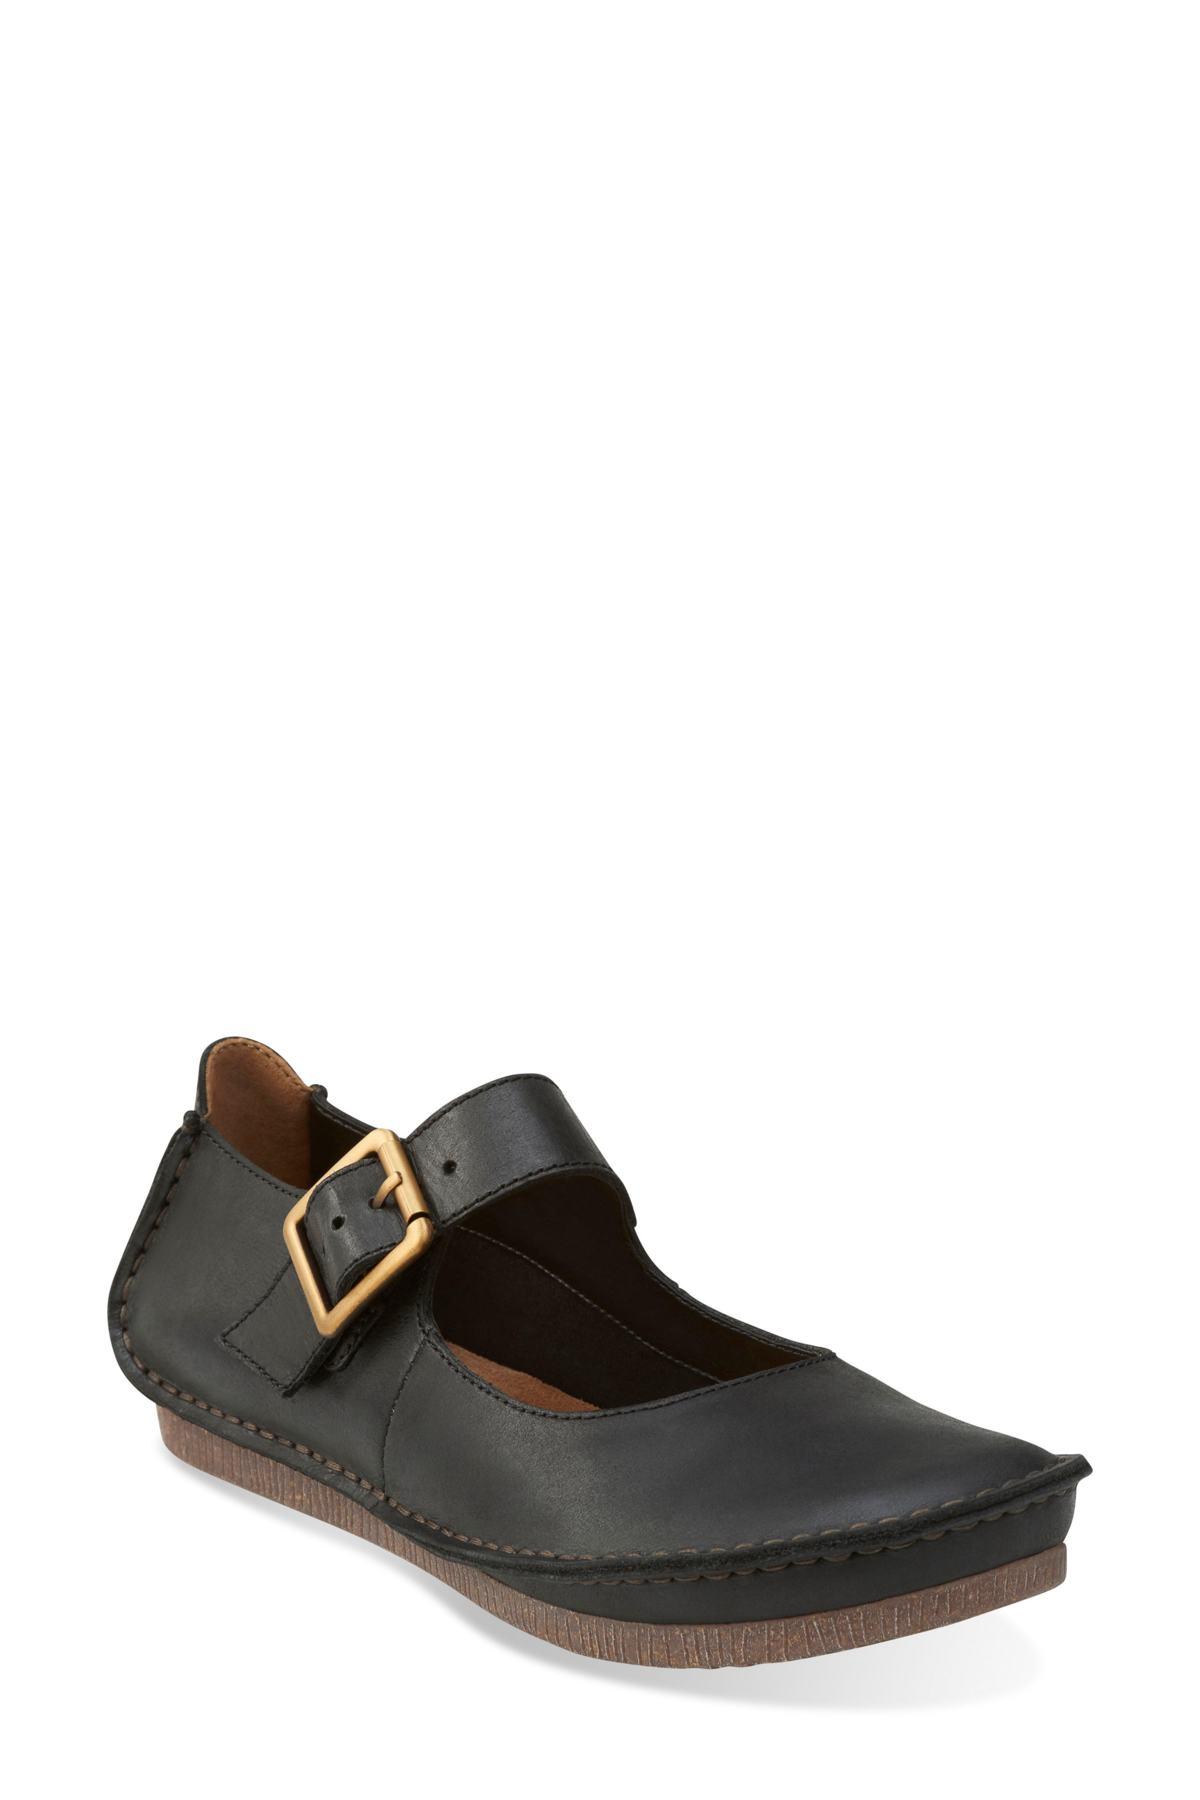 Clarks Leather Janey June in Black Leather (Black) | Lyst